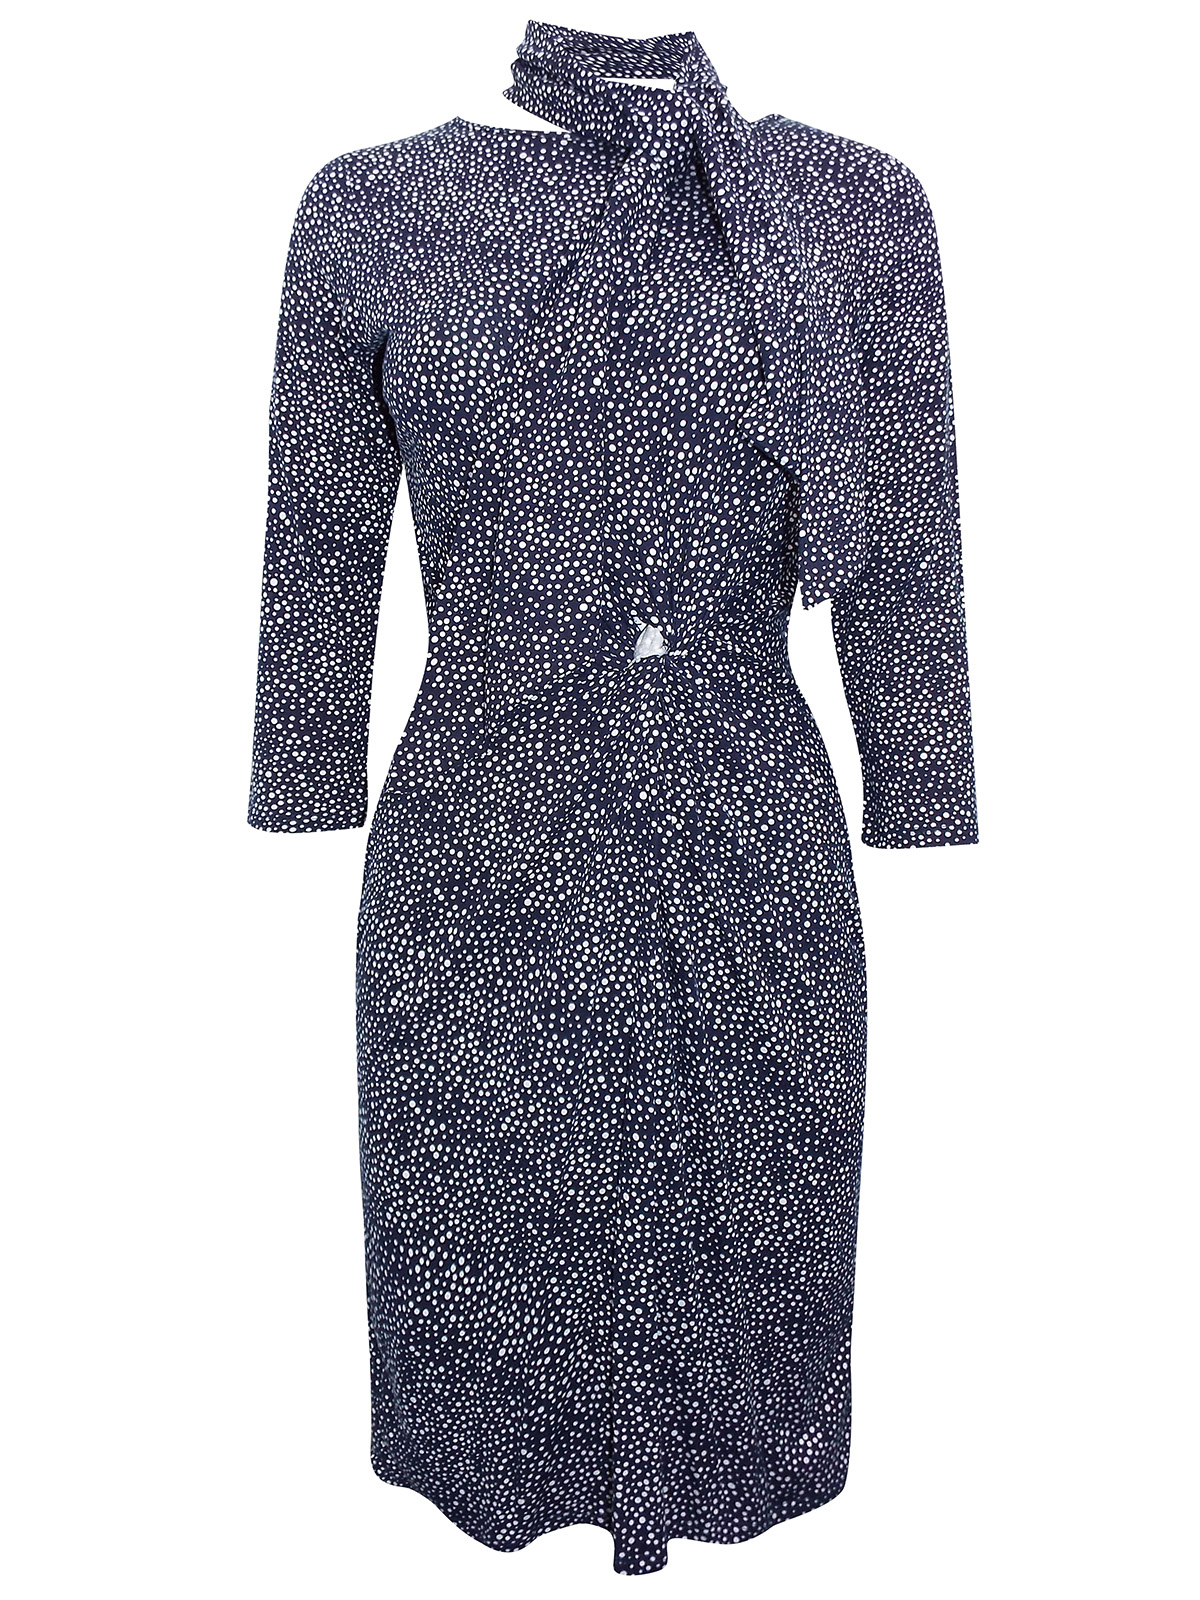 First Avenue NAVY Twist Side Printed Jersey Dress & Matching Scarf ...